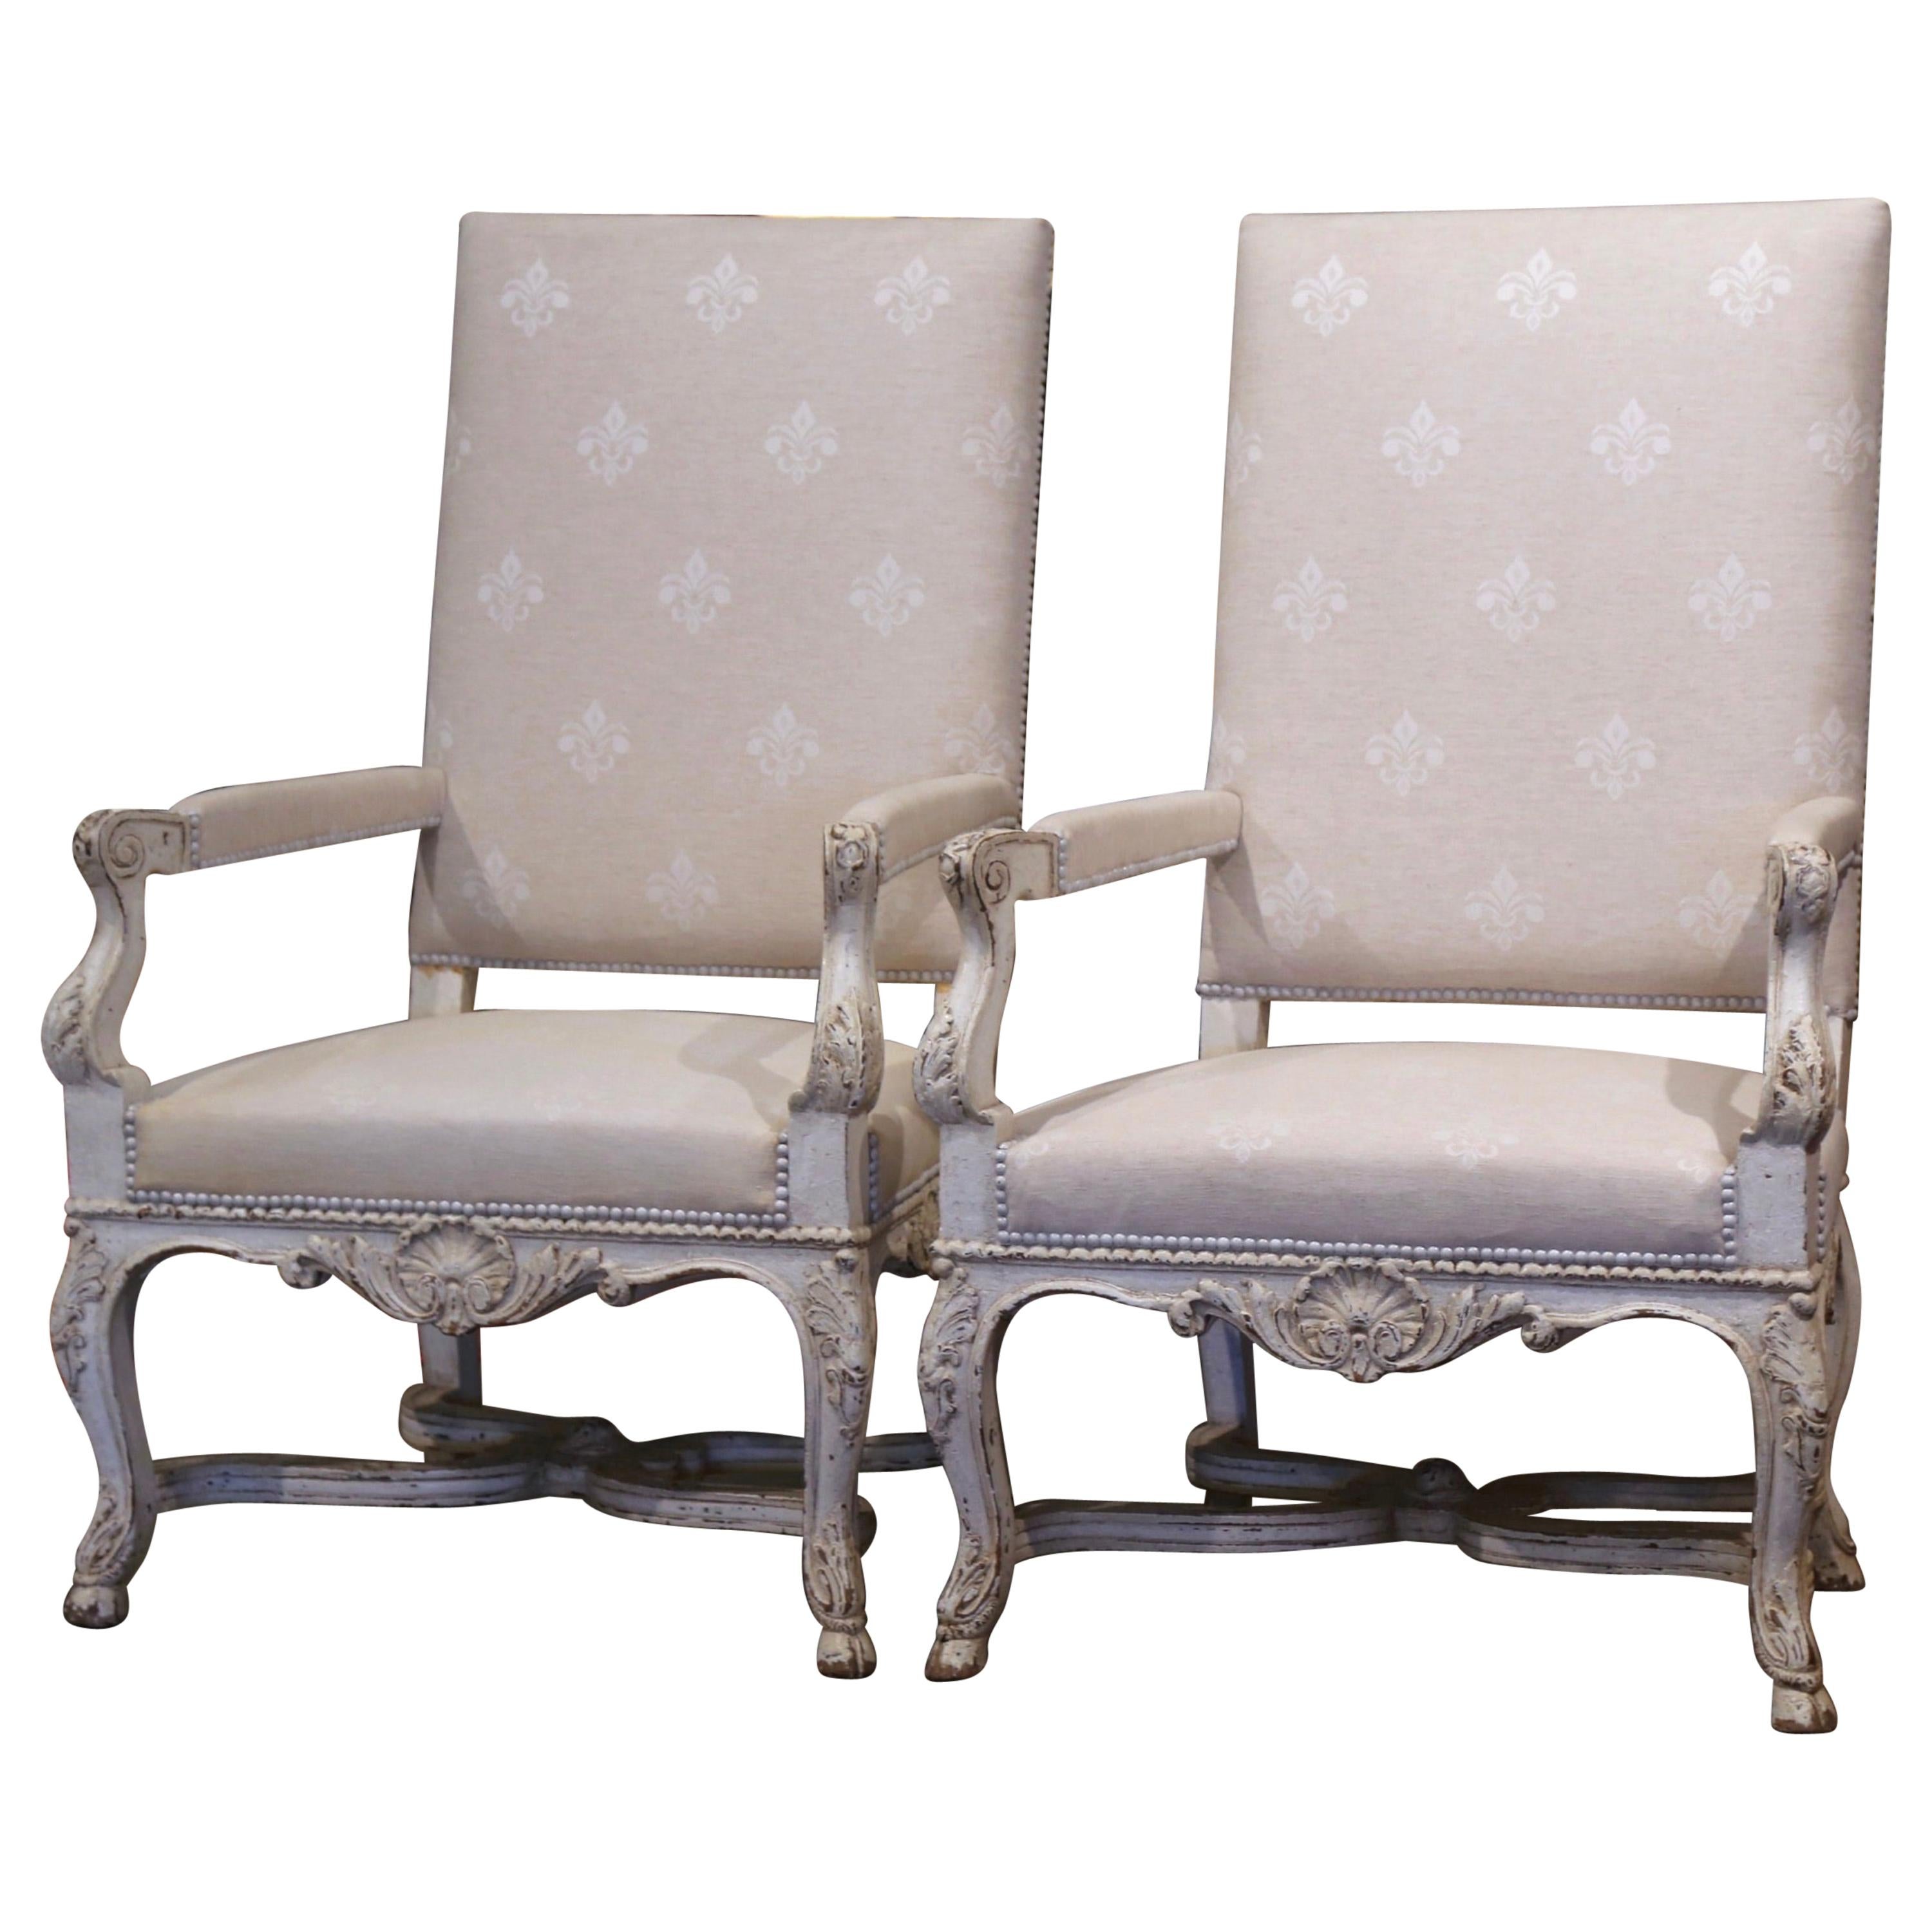 These elegant antique armchairs were crafted in France, circa 1870. Each large fauteuil stands on cabriole legs ending with hoof feet over an intricate curved bottom stretcher embellished by a middle carved floral medallion; it is further decorated